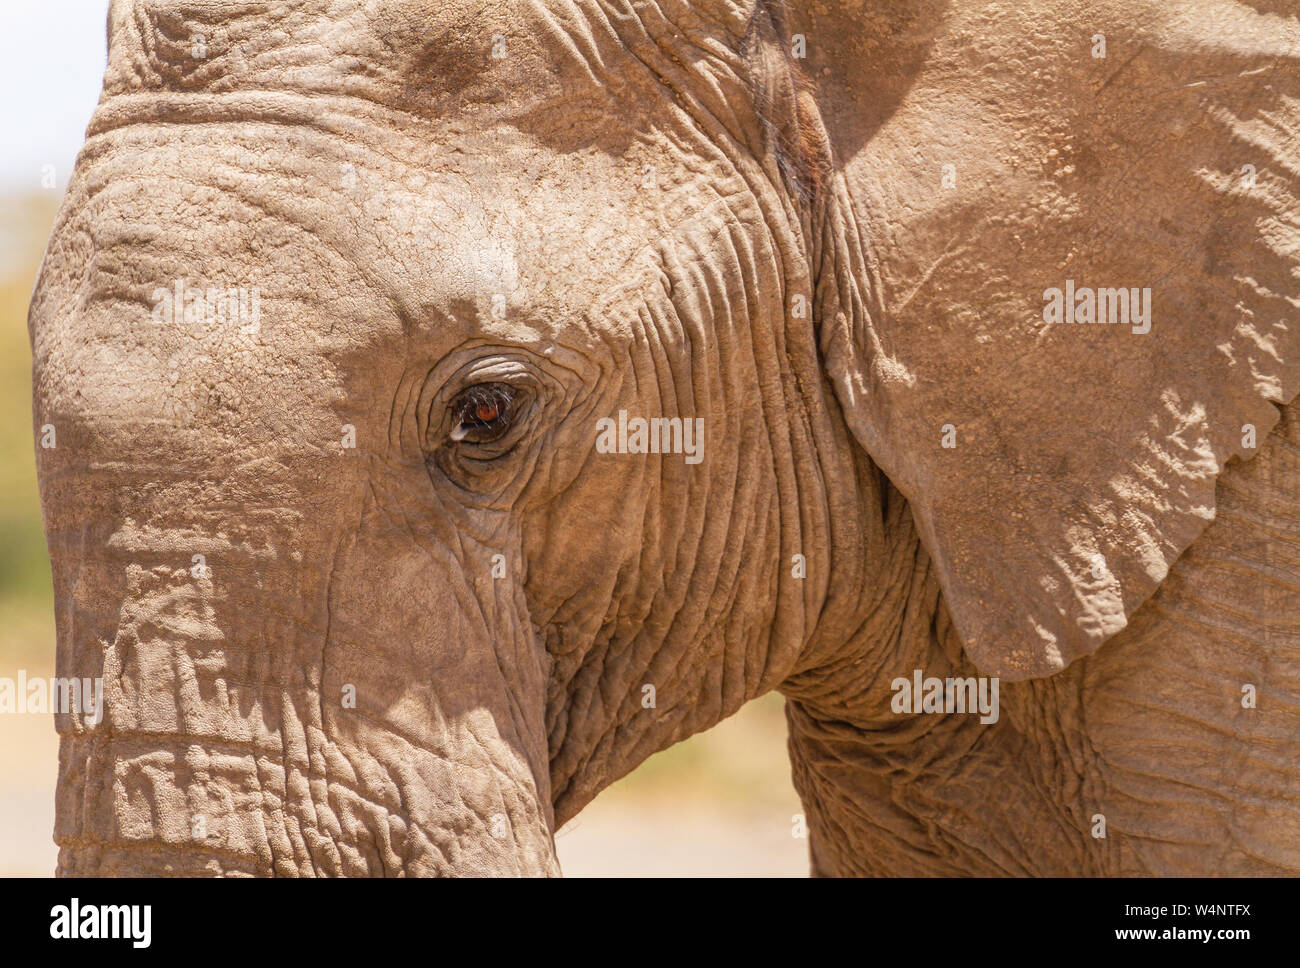 African Elephant face, Loxodonta Africana, profile with open eye. Ol Pejeta Conservancy, Kenya, Africa. Close up close-up skin surface detail Stock Photo